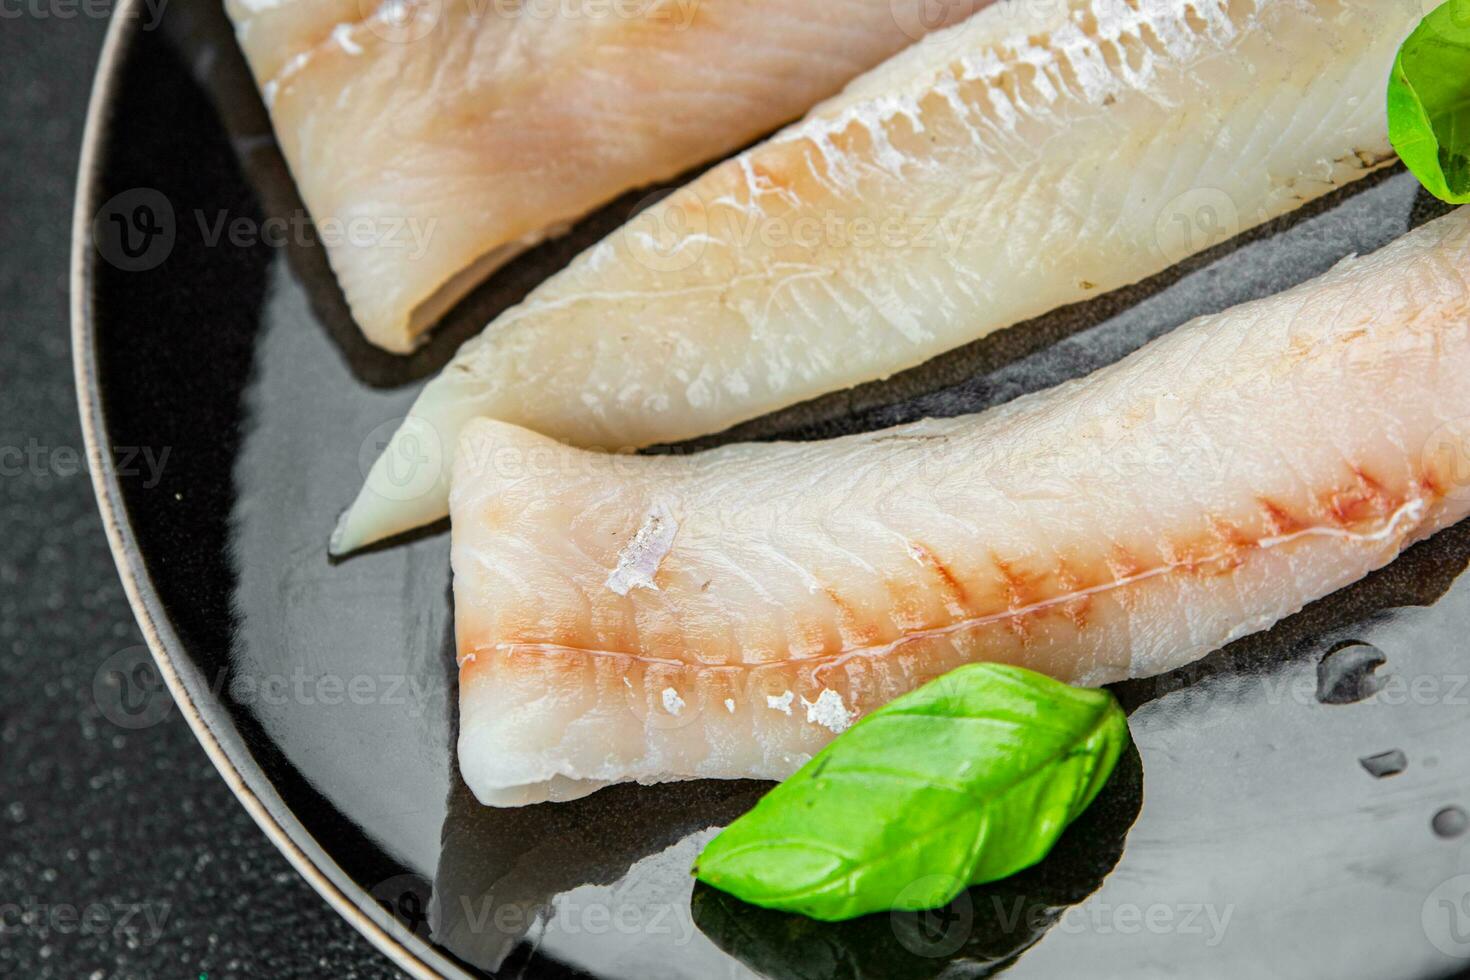 blue whiting fish fillet fresh seafood delicious healthy eating Pescetarian cooking appetizer meal food snack on the table copy space food background rustic top view photo